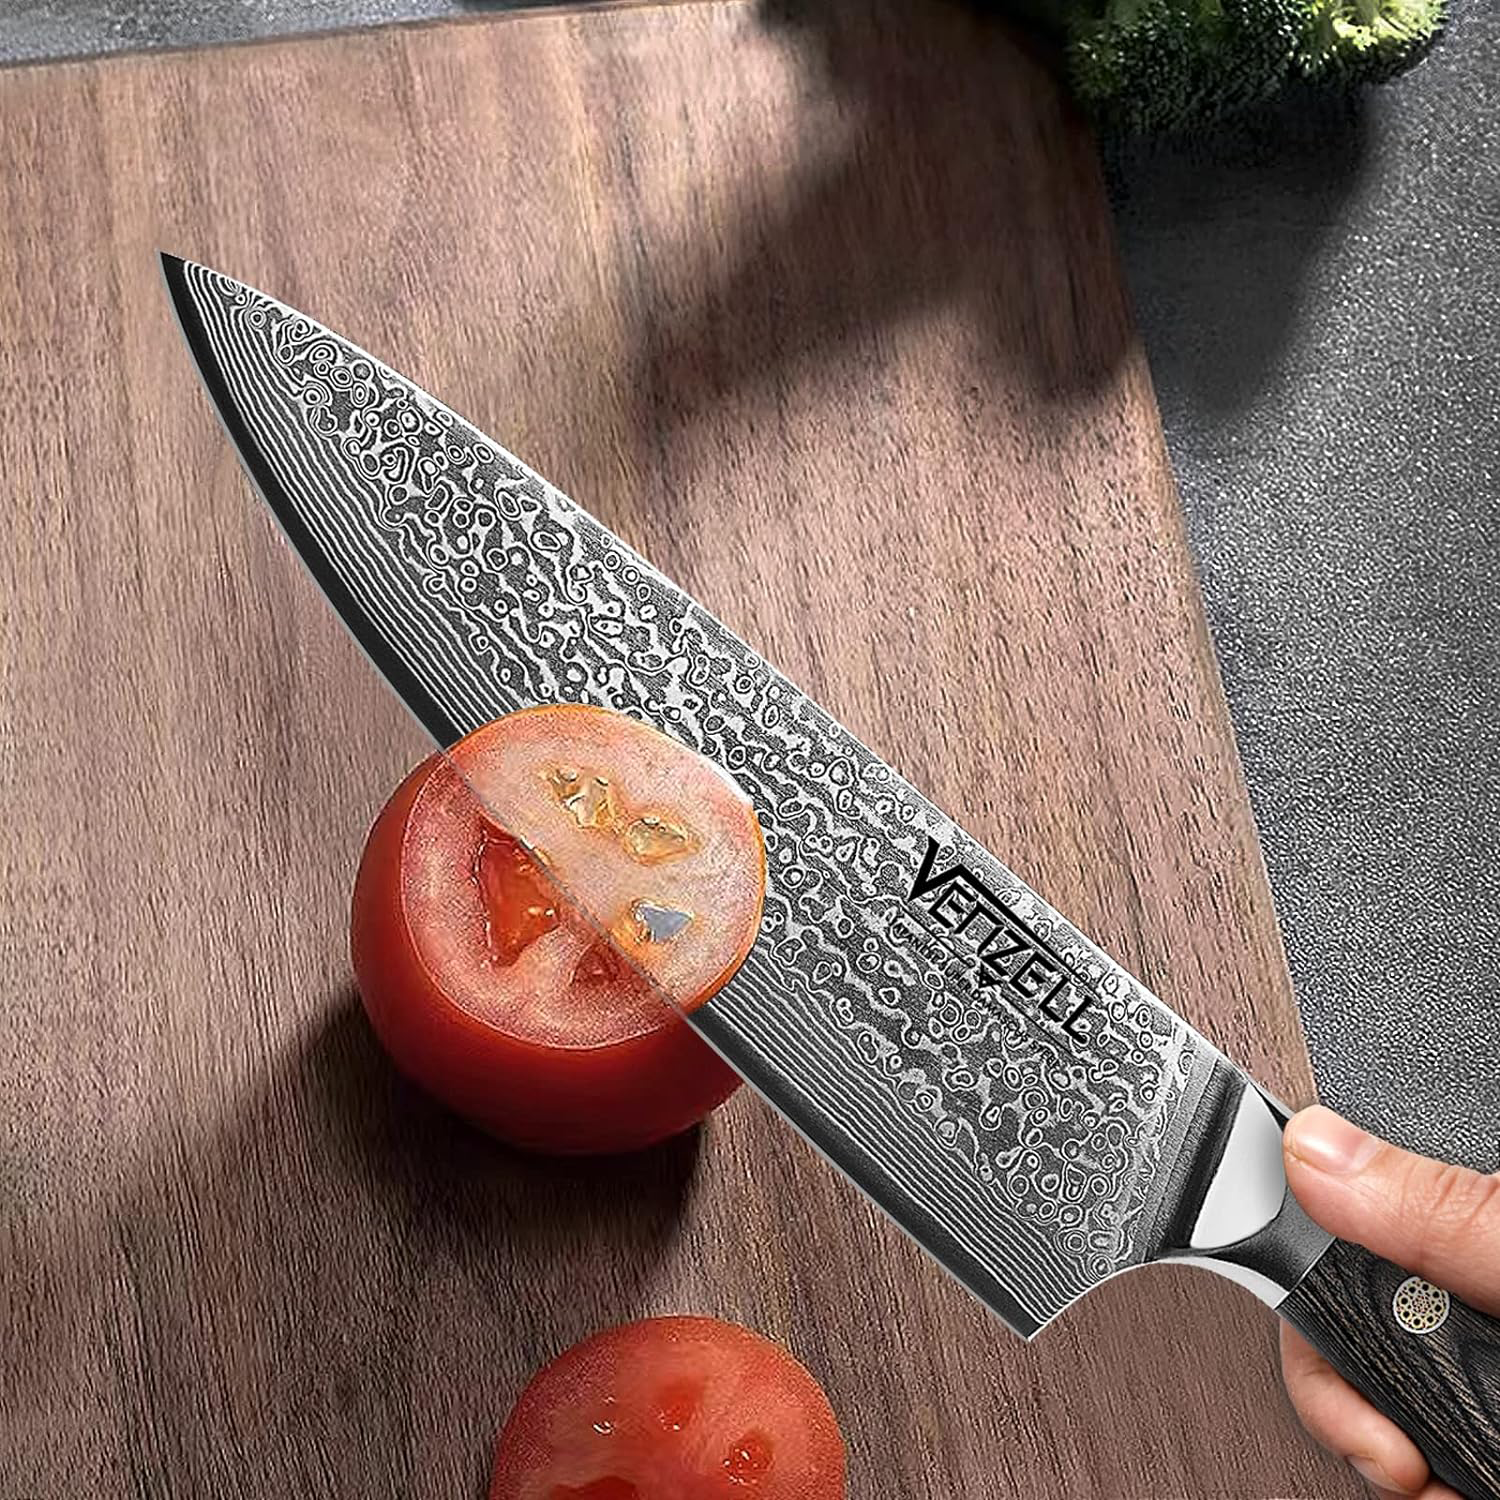 Damascus Steel Kitchen Knife 67 Layers Of High Carbon Steel Forged